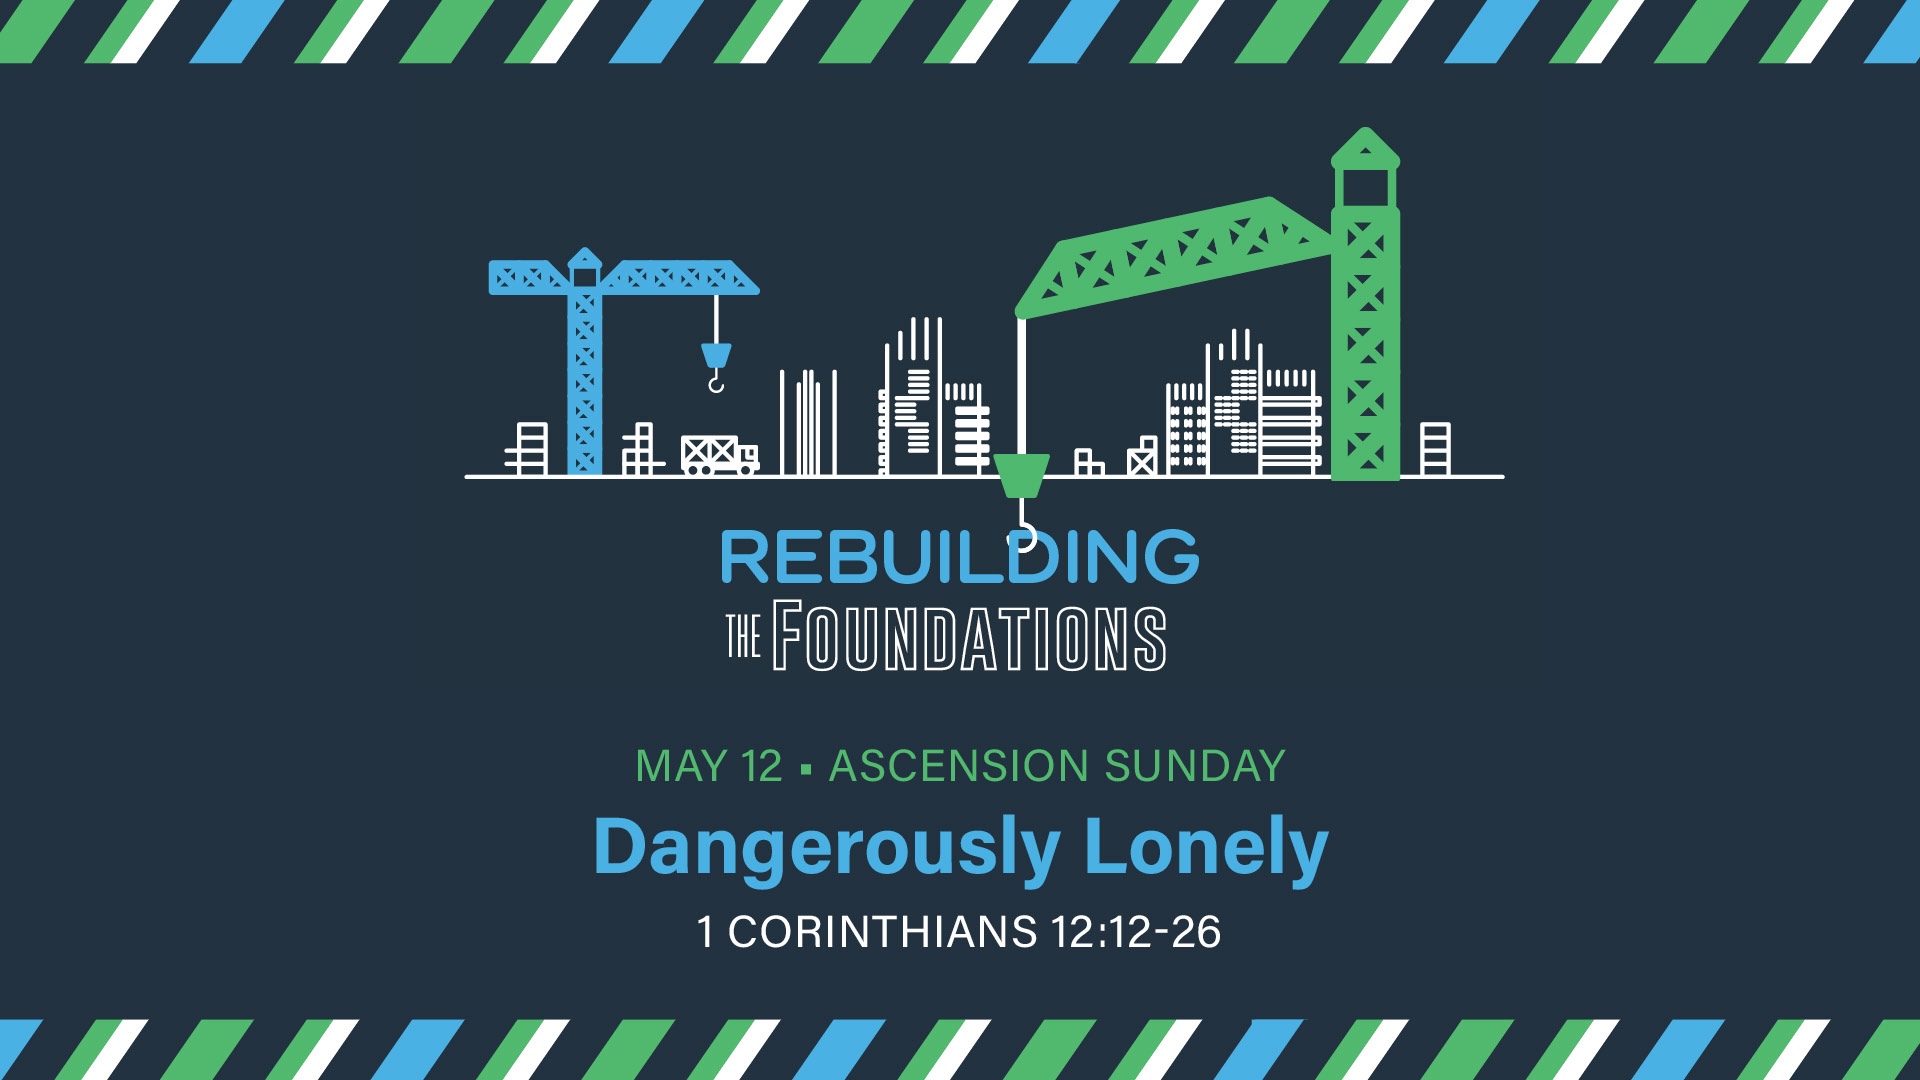 May 12 - Rebuilding the Foundations: Dangerously Lonely